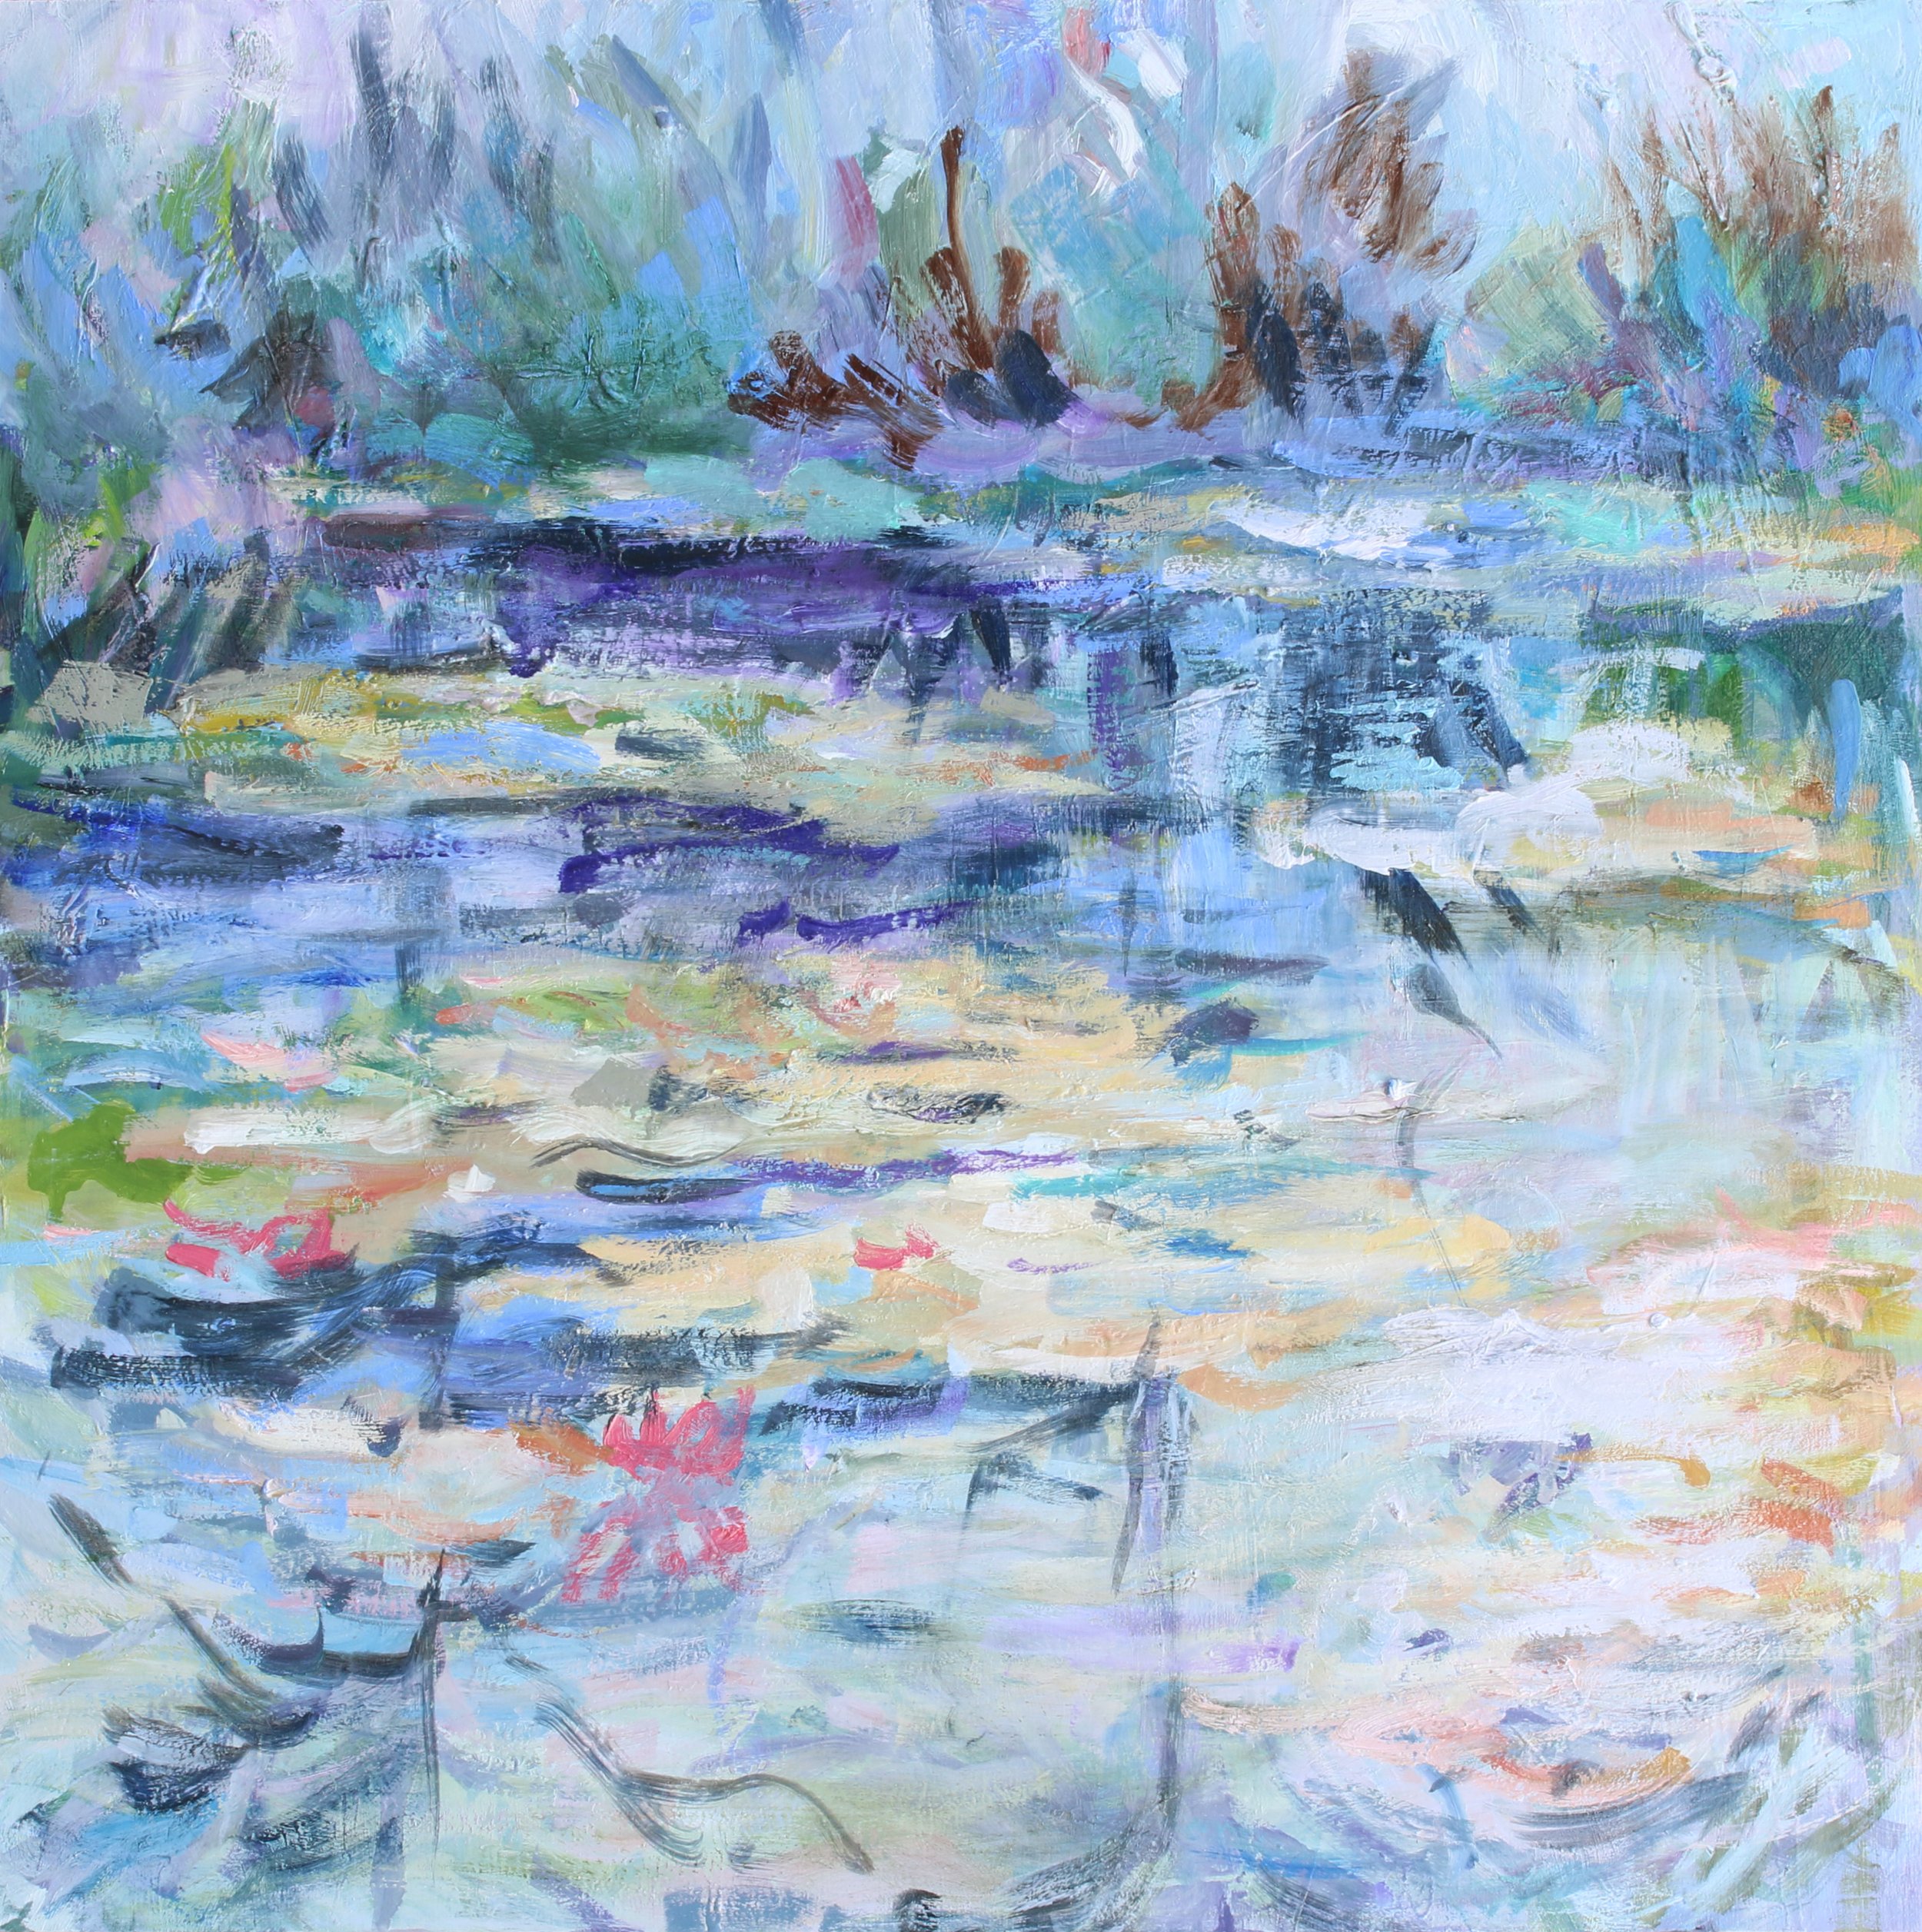 Pond Reflections #2 on panel